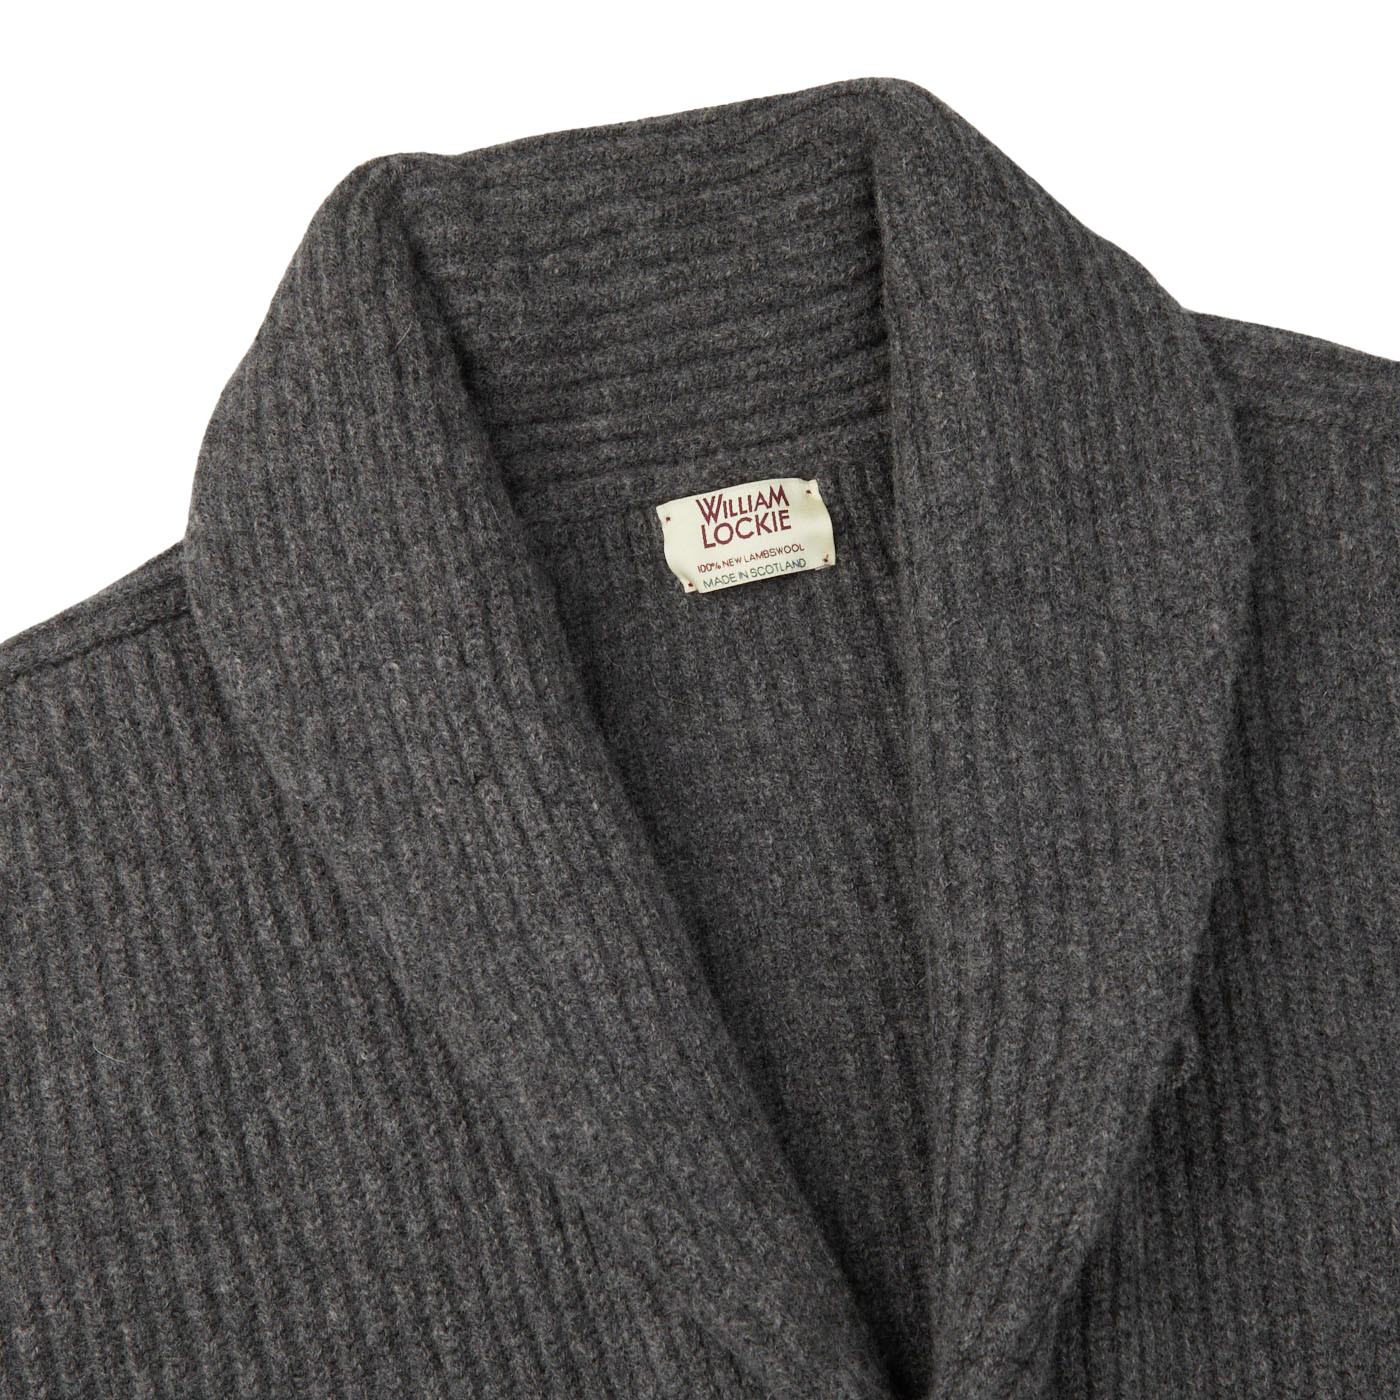 A William Lockie Cliff Grey Lambswool Shawl Collar Cardigan with leather buttons.